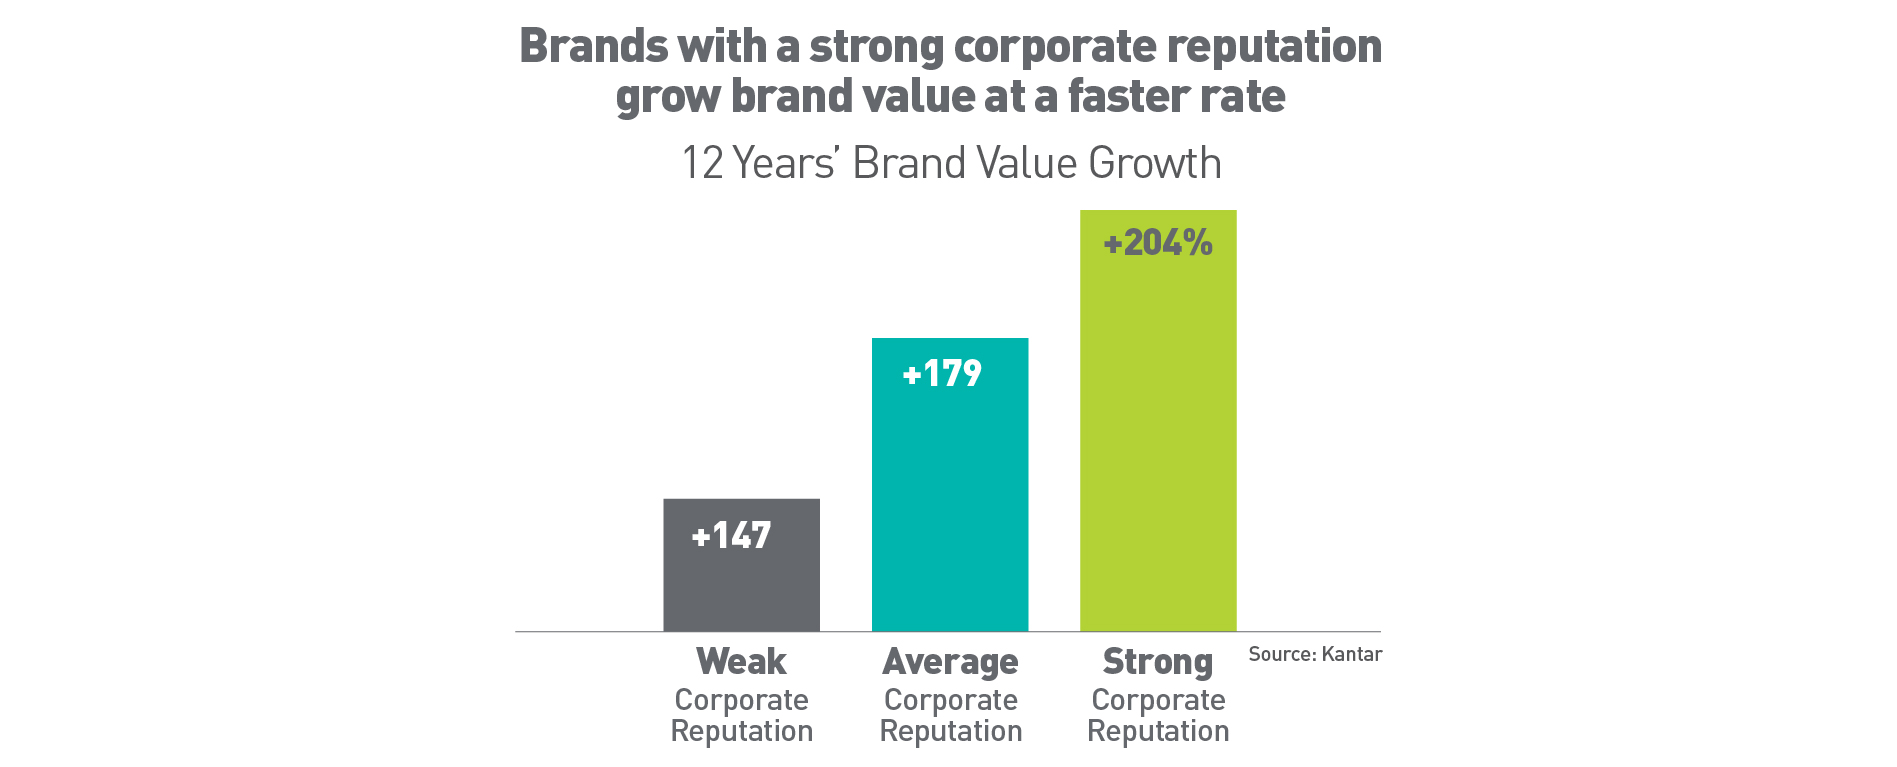 Brands with a strong corporate reputation grow brand value at a faster rate - graph